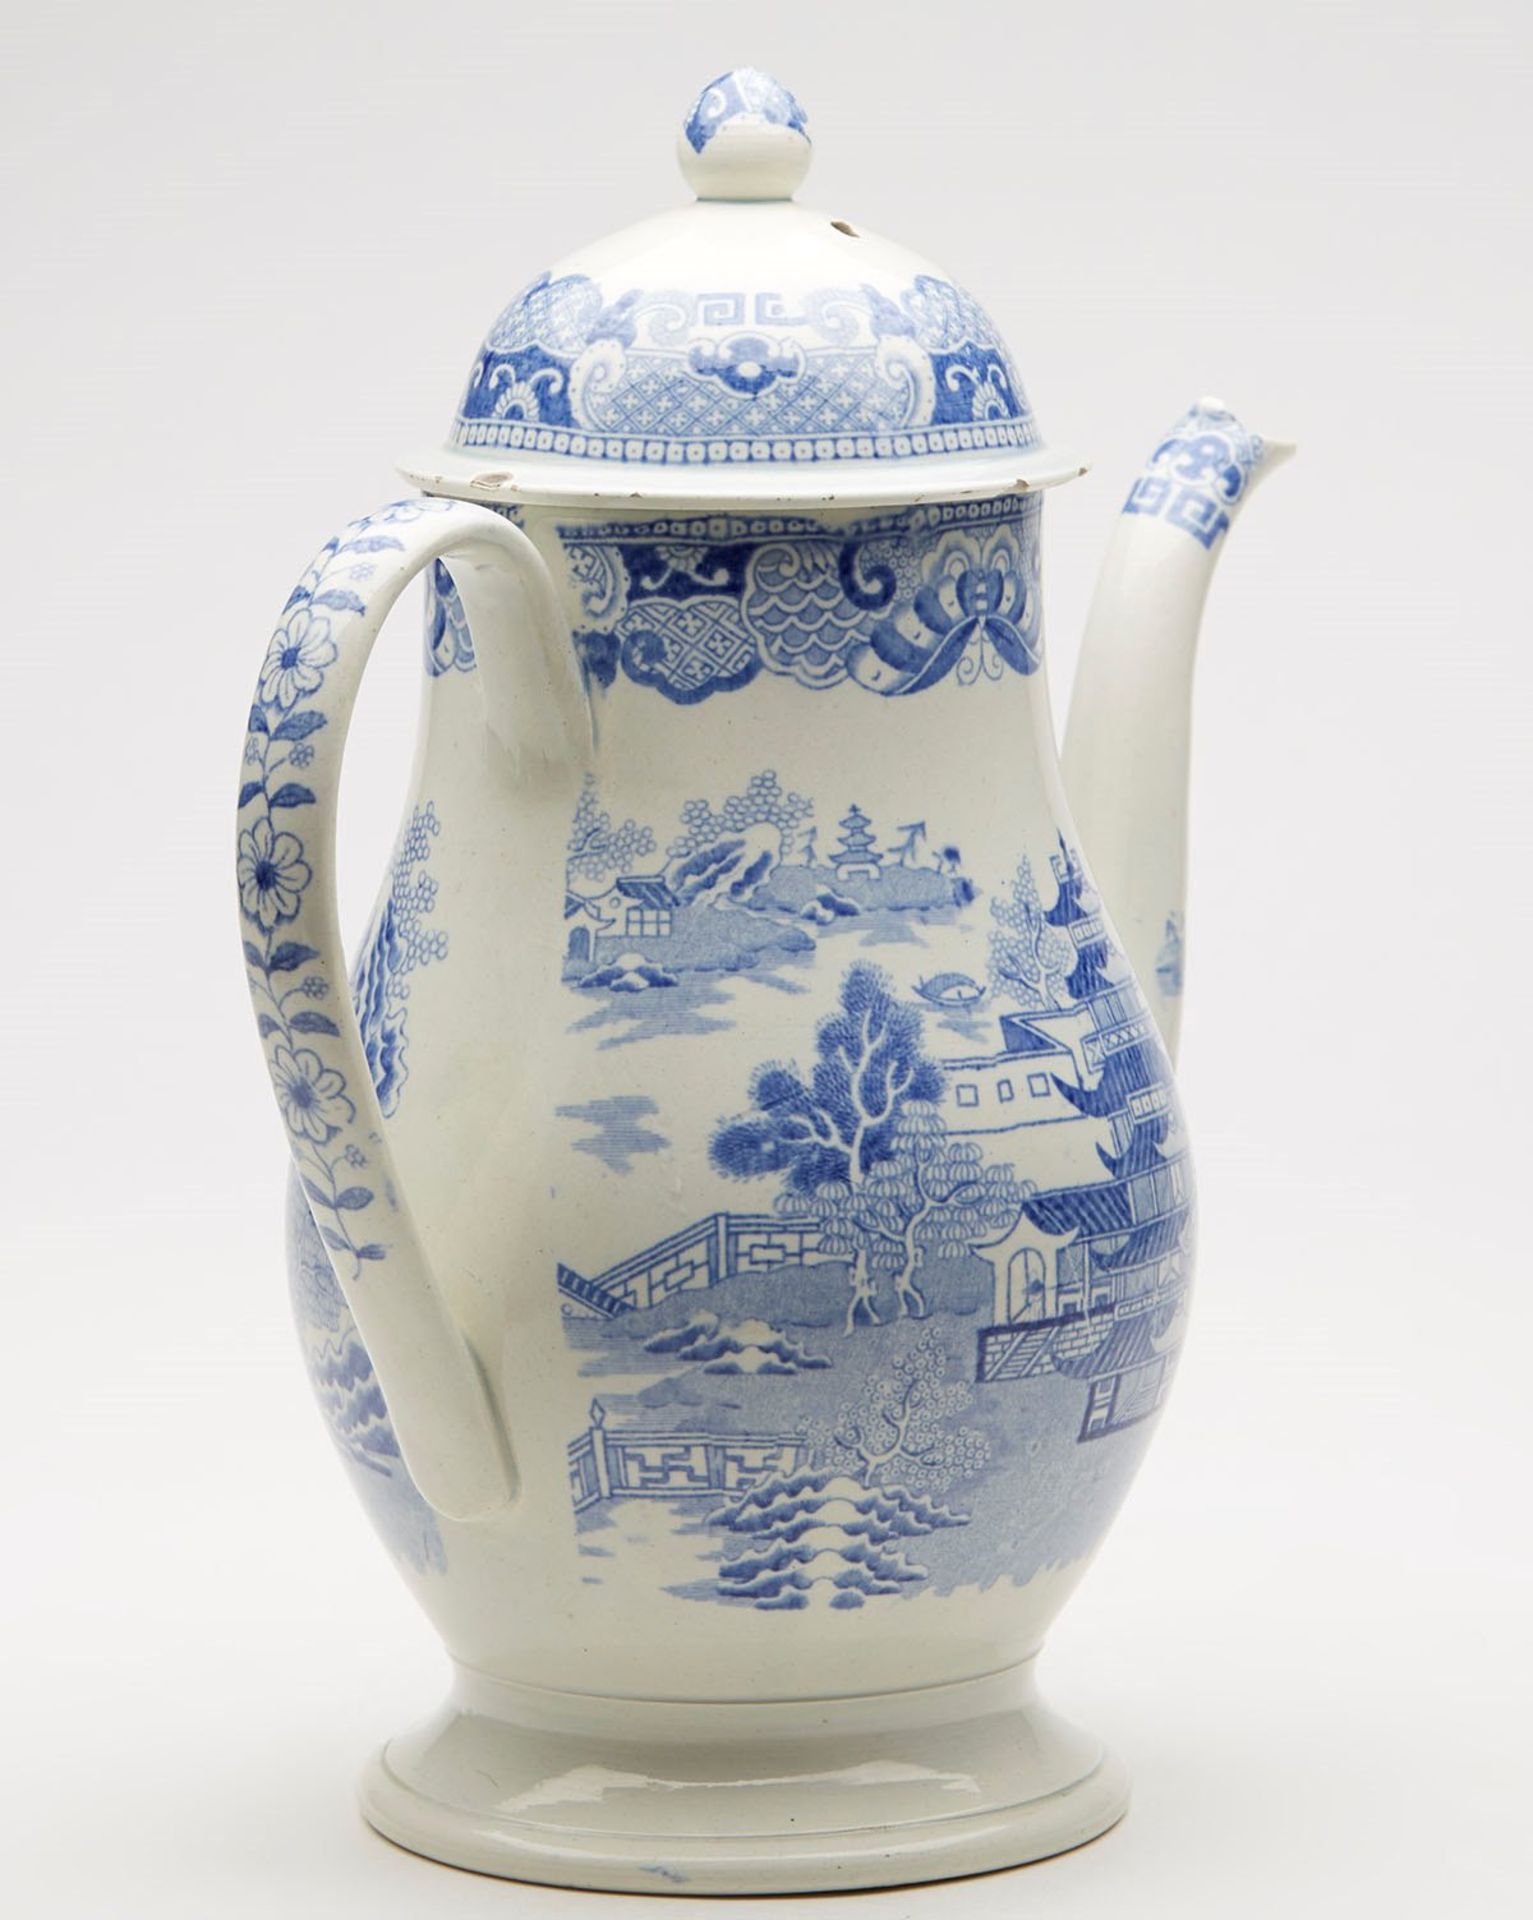 ANTIQUE ENGLISH CHINOISERIE BLUE & WHITE TEAPOT 19TH C.   DIMENSIONS   Height 27cm, Width 23,5cm - Image 4 of 10